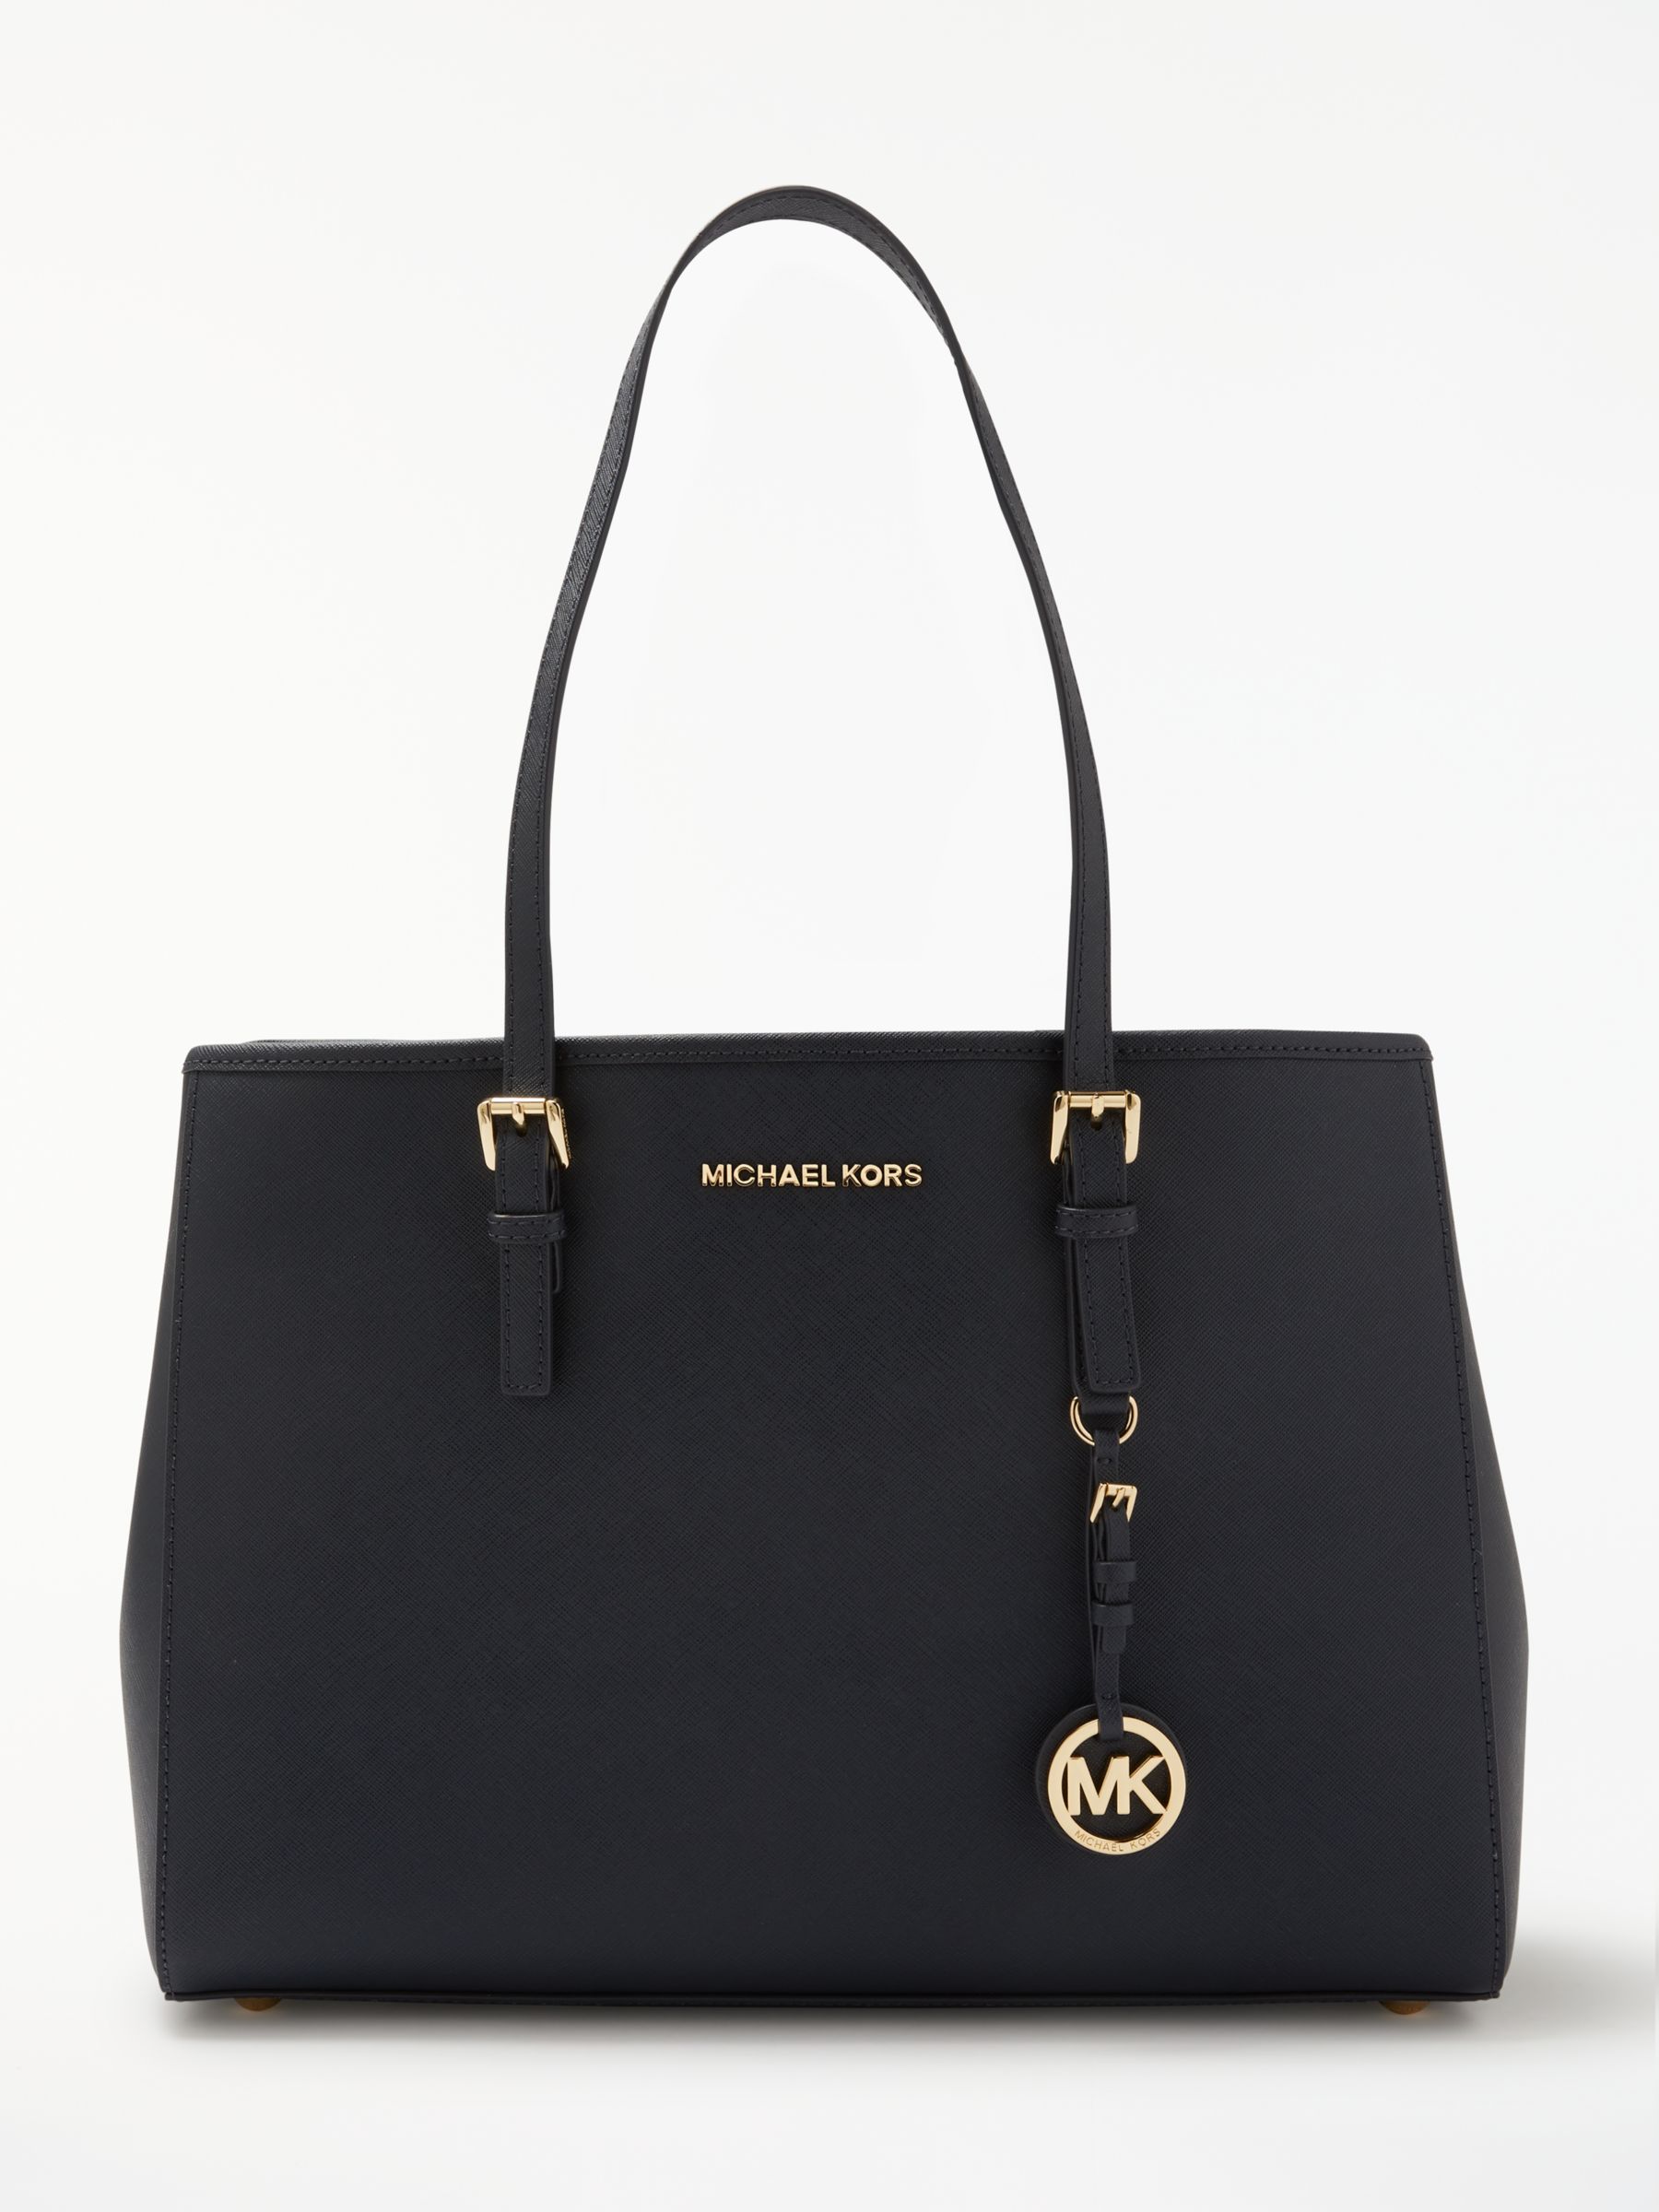 mk bags offers